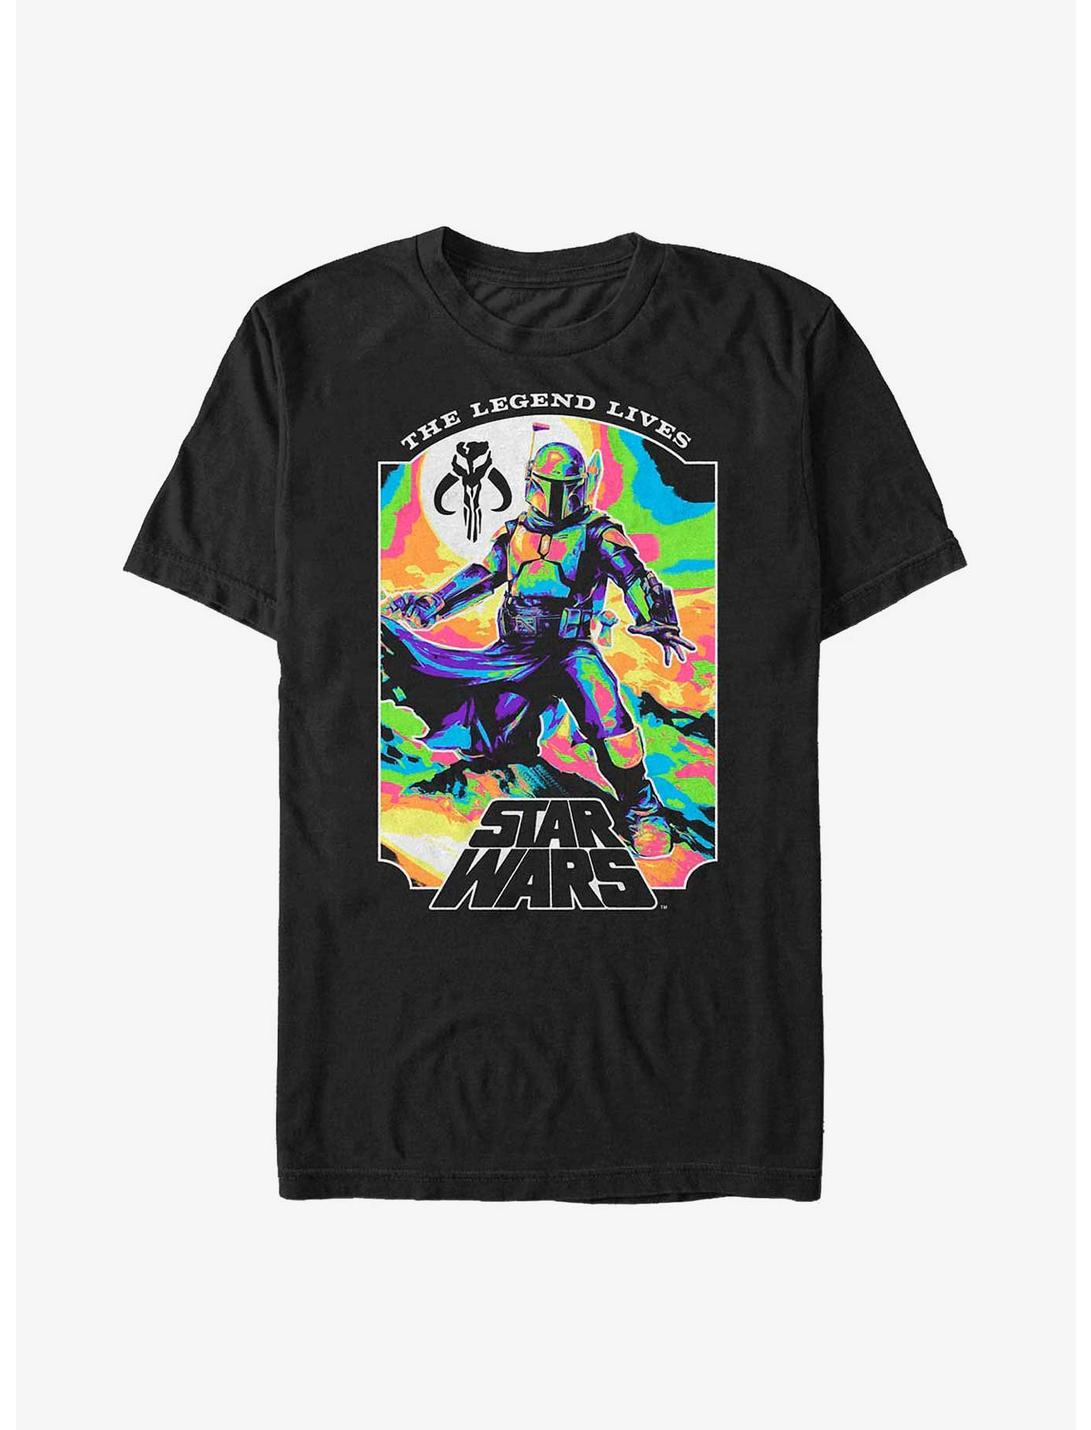 Star Wars: The Book Of Boba Fett The Legend Lives Themal T-Shirt, BLACK, hi-res